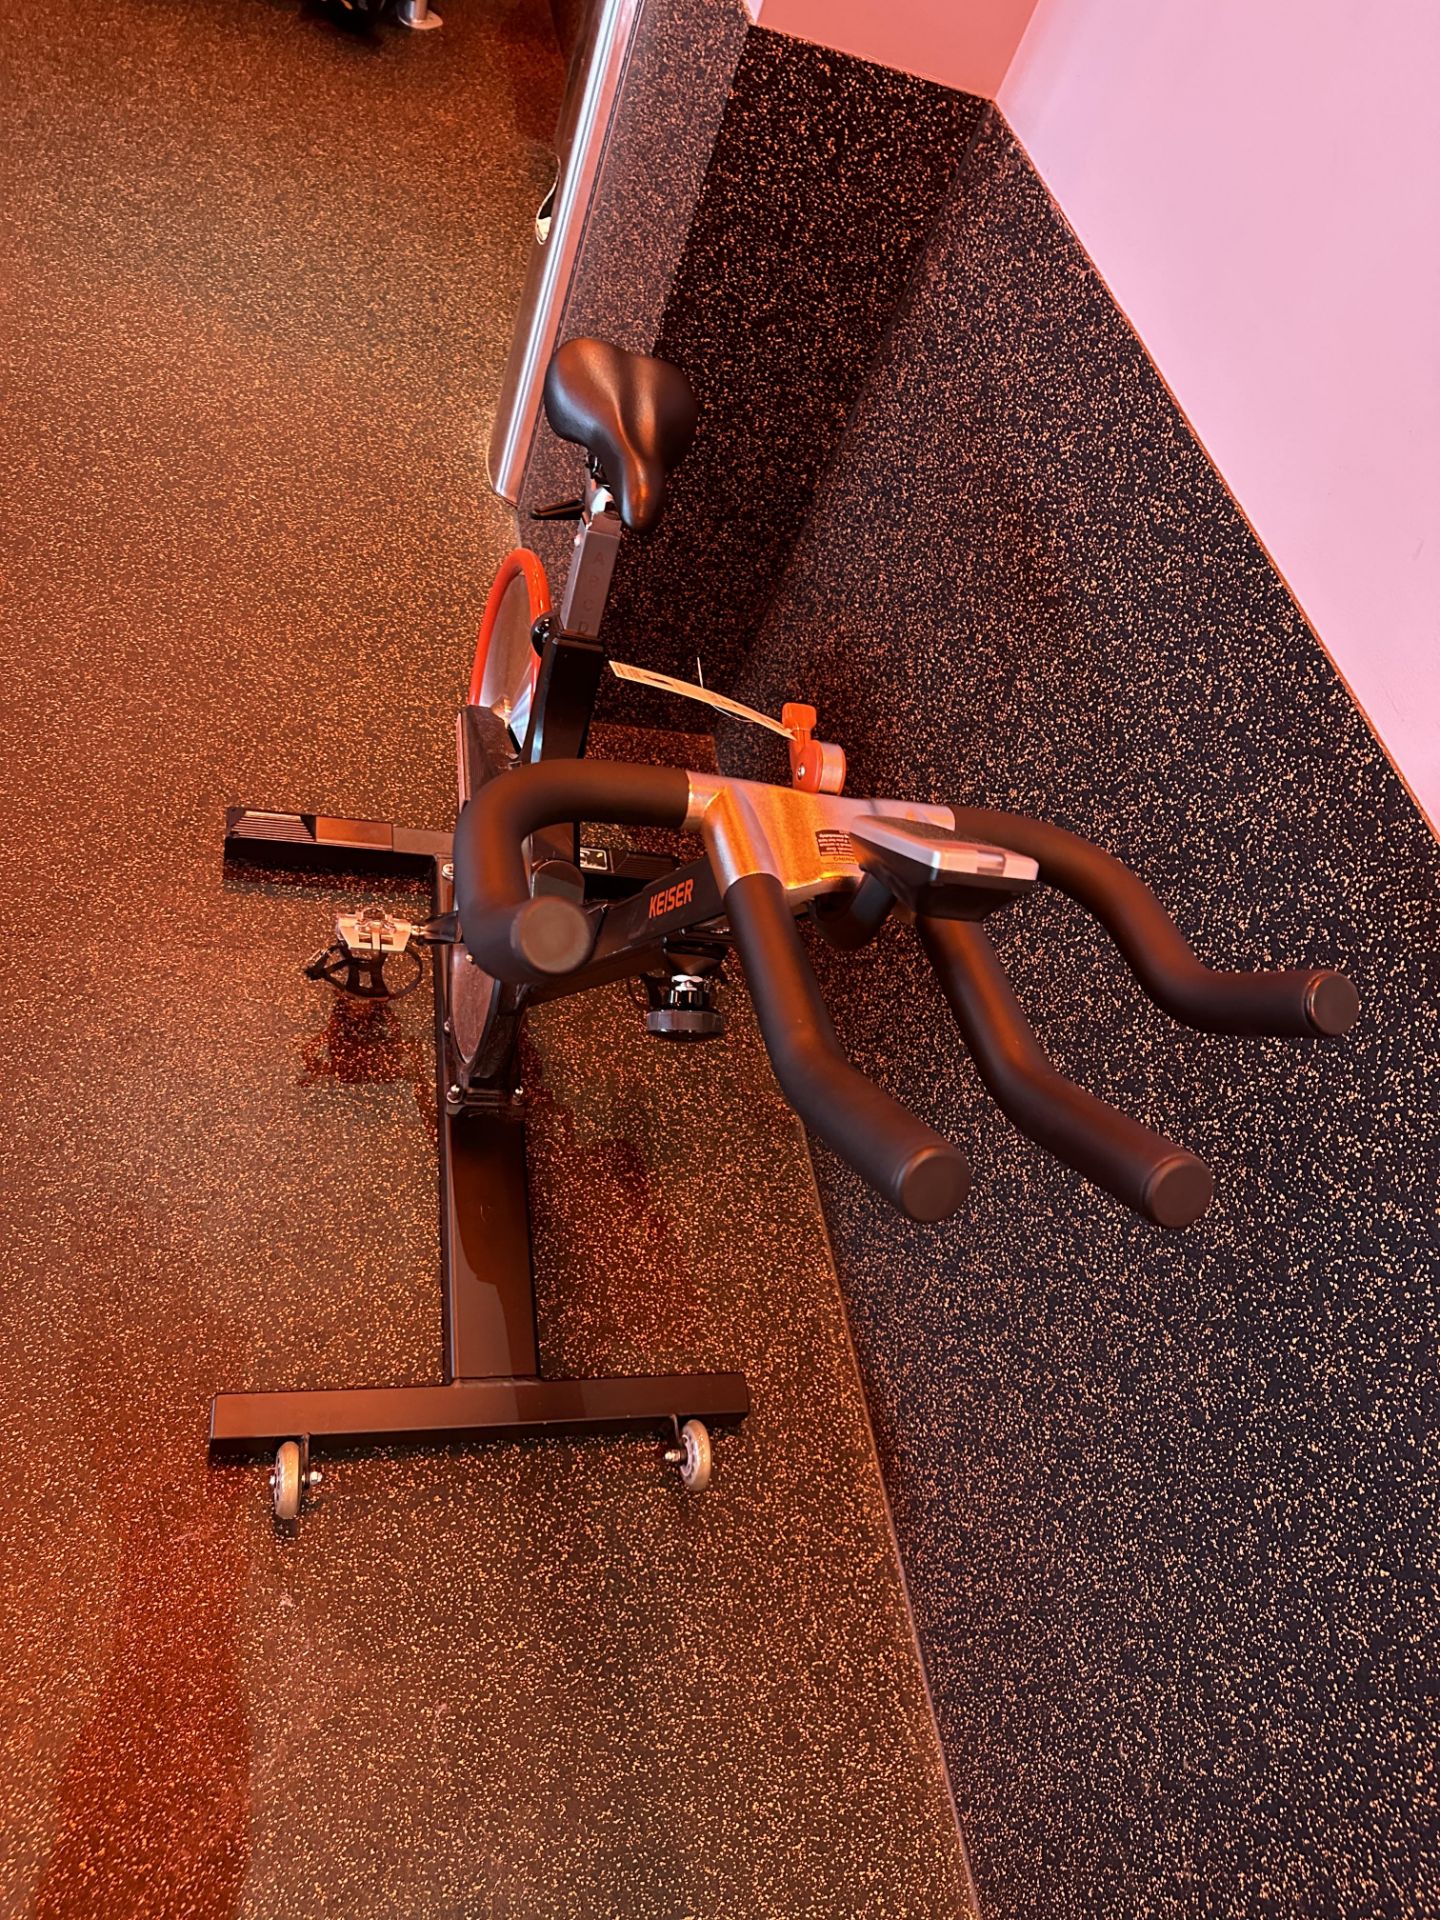 Keiser M3 Upright Stationary Bike #005501BBC w/Keiser Kinetic Readout & Adjustable Seat S/N: - Image 3 of 3